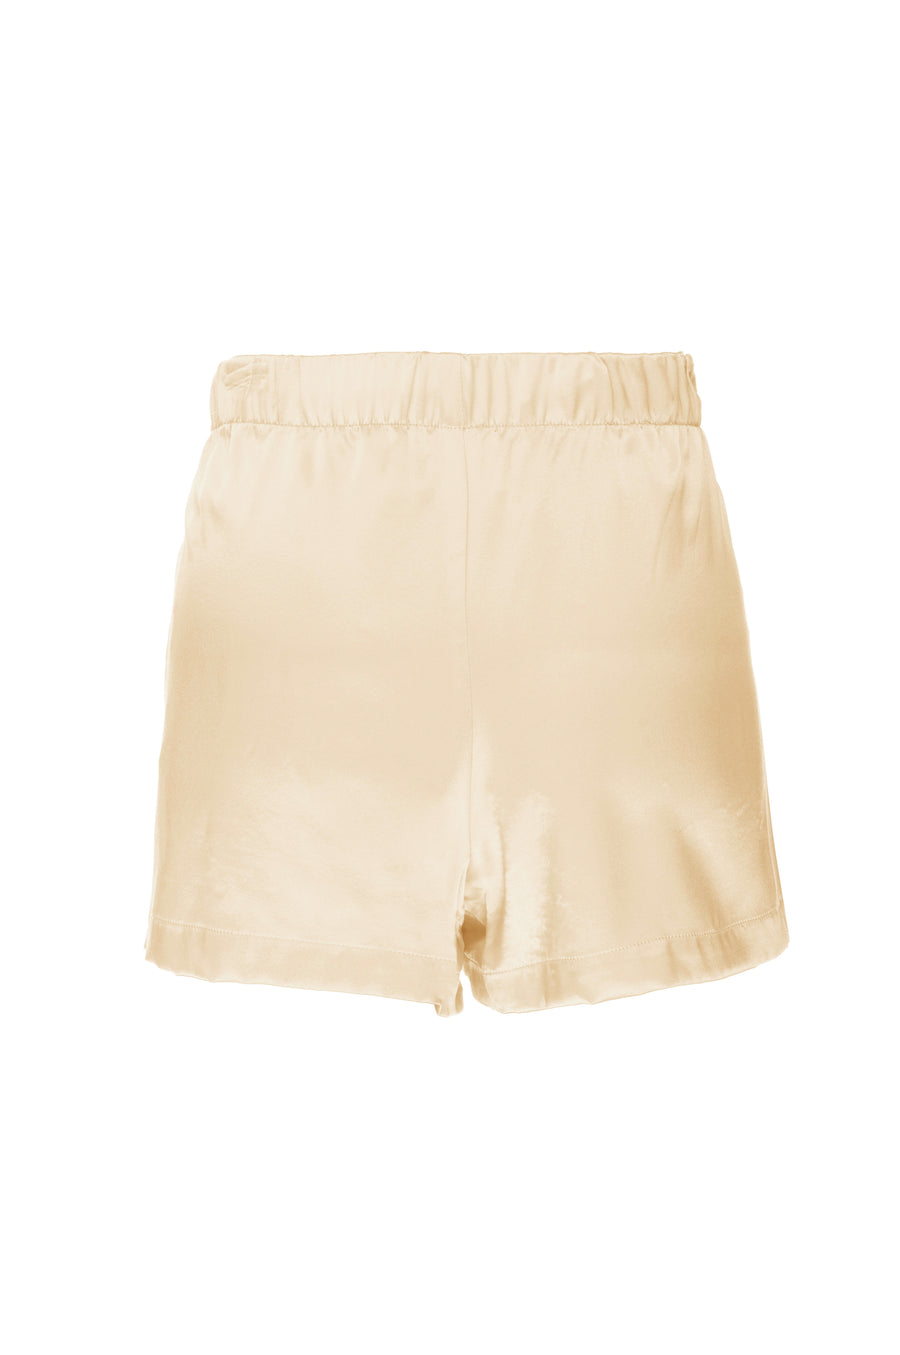 Silk Charmeuse Shorts: Butter Yellow